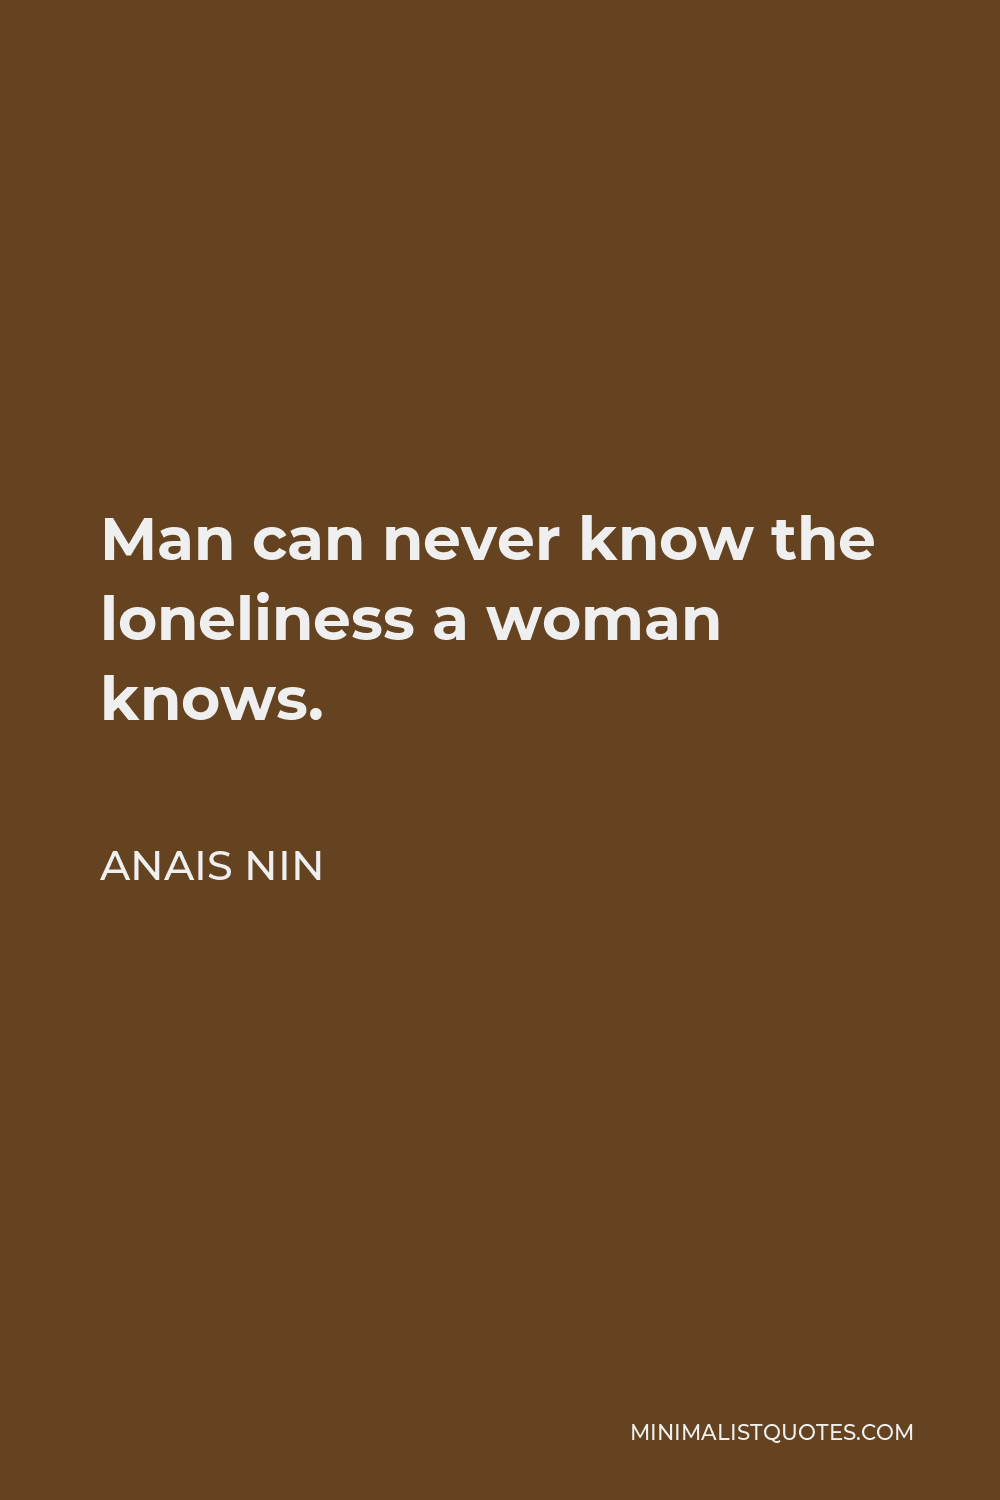 Anais Nin Quote - Man can never know the loneliness a woman knows.